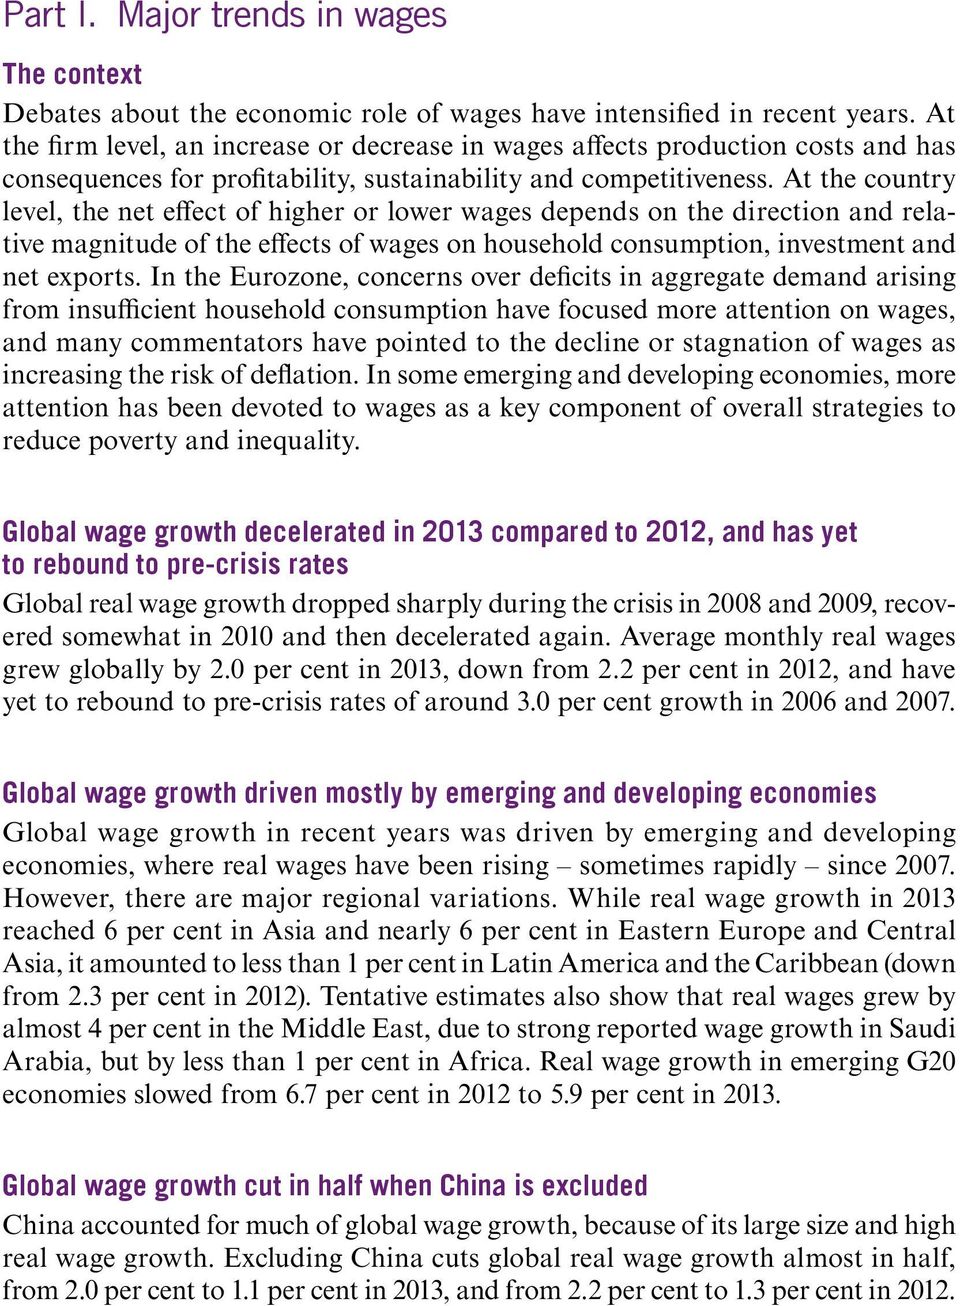 At the country level, the net effect of higher or lower wages depends on the direction and relative magnitude of the effects of wages on household consumption, investment and net exports.